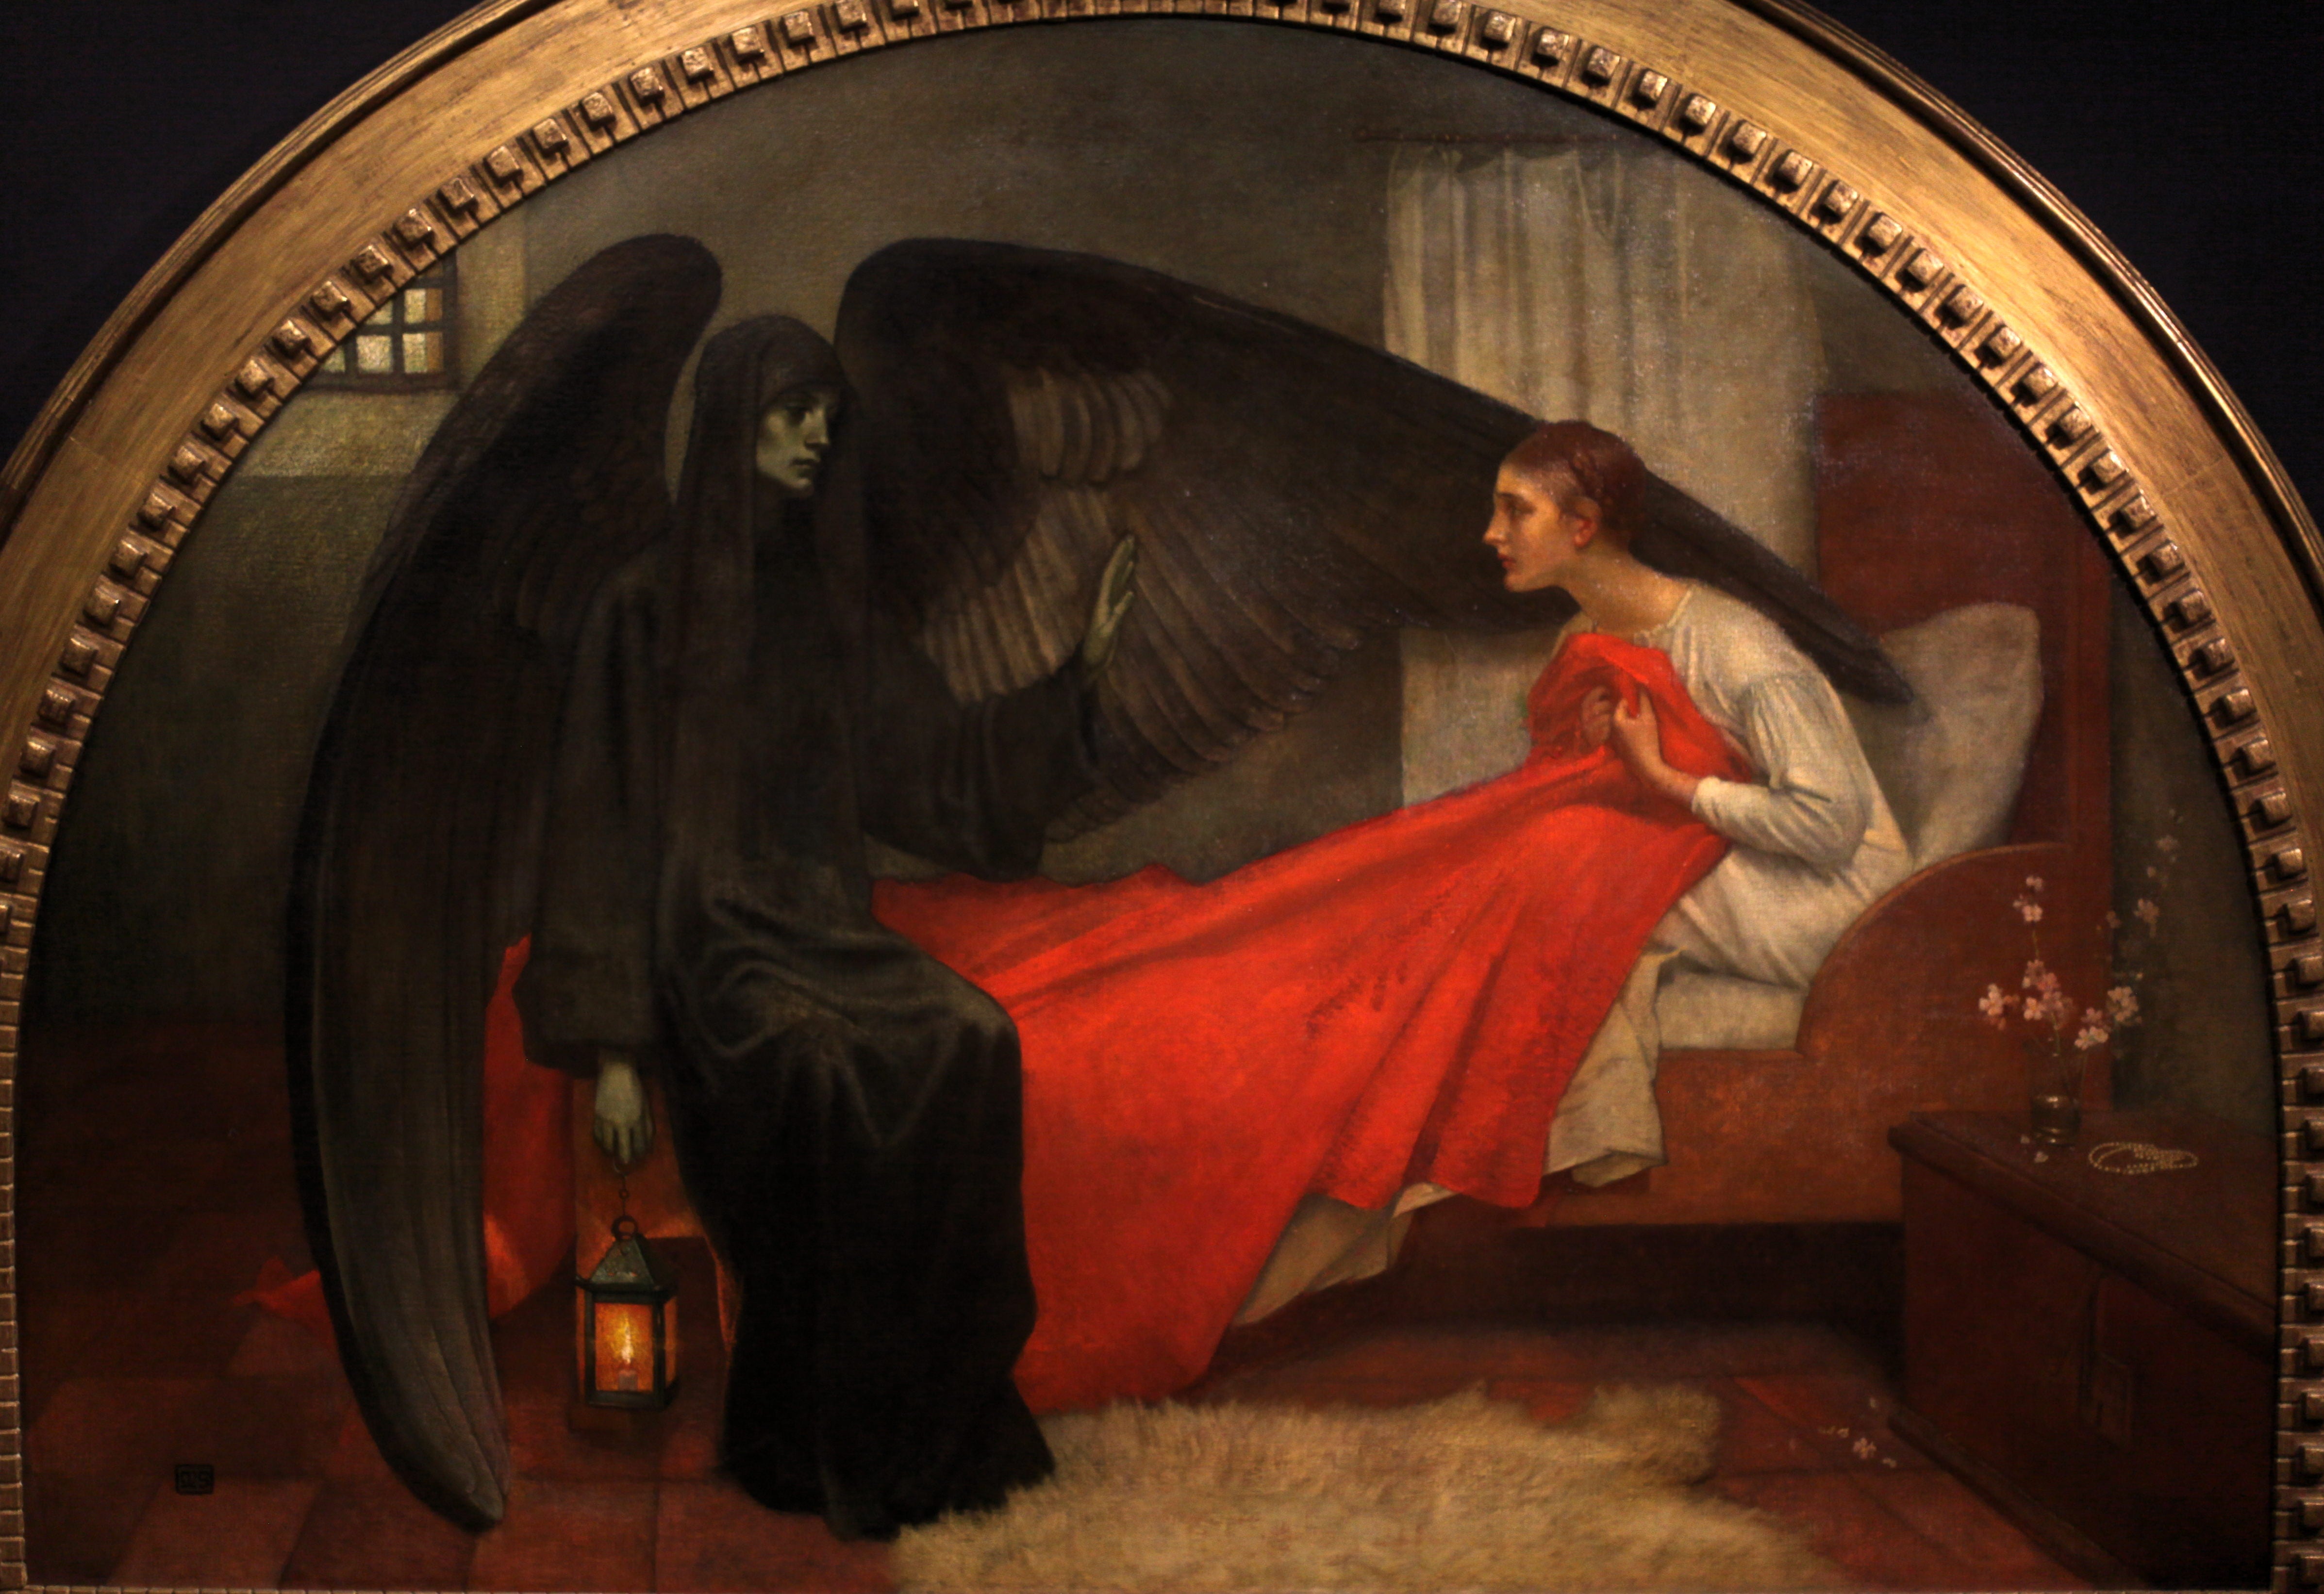 Learn About the Angel of Death